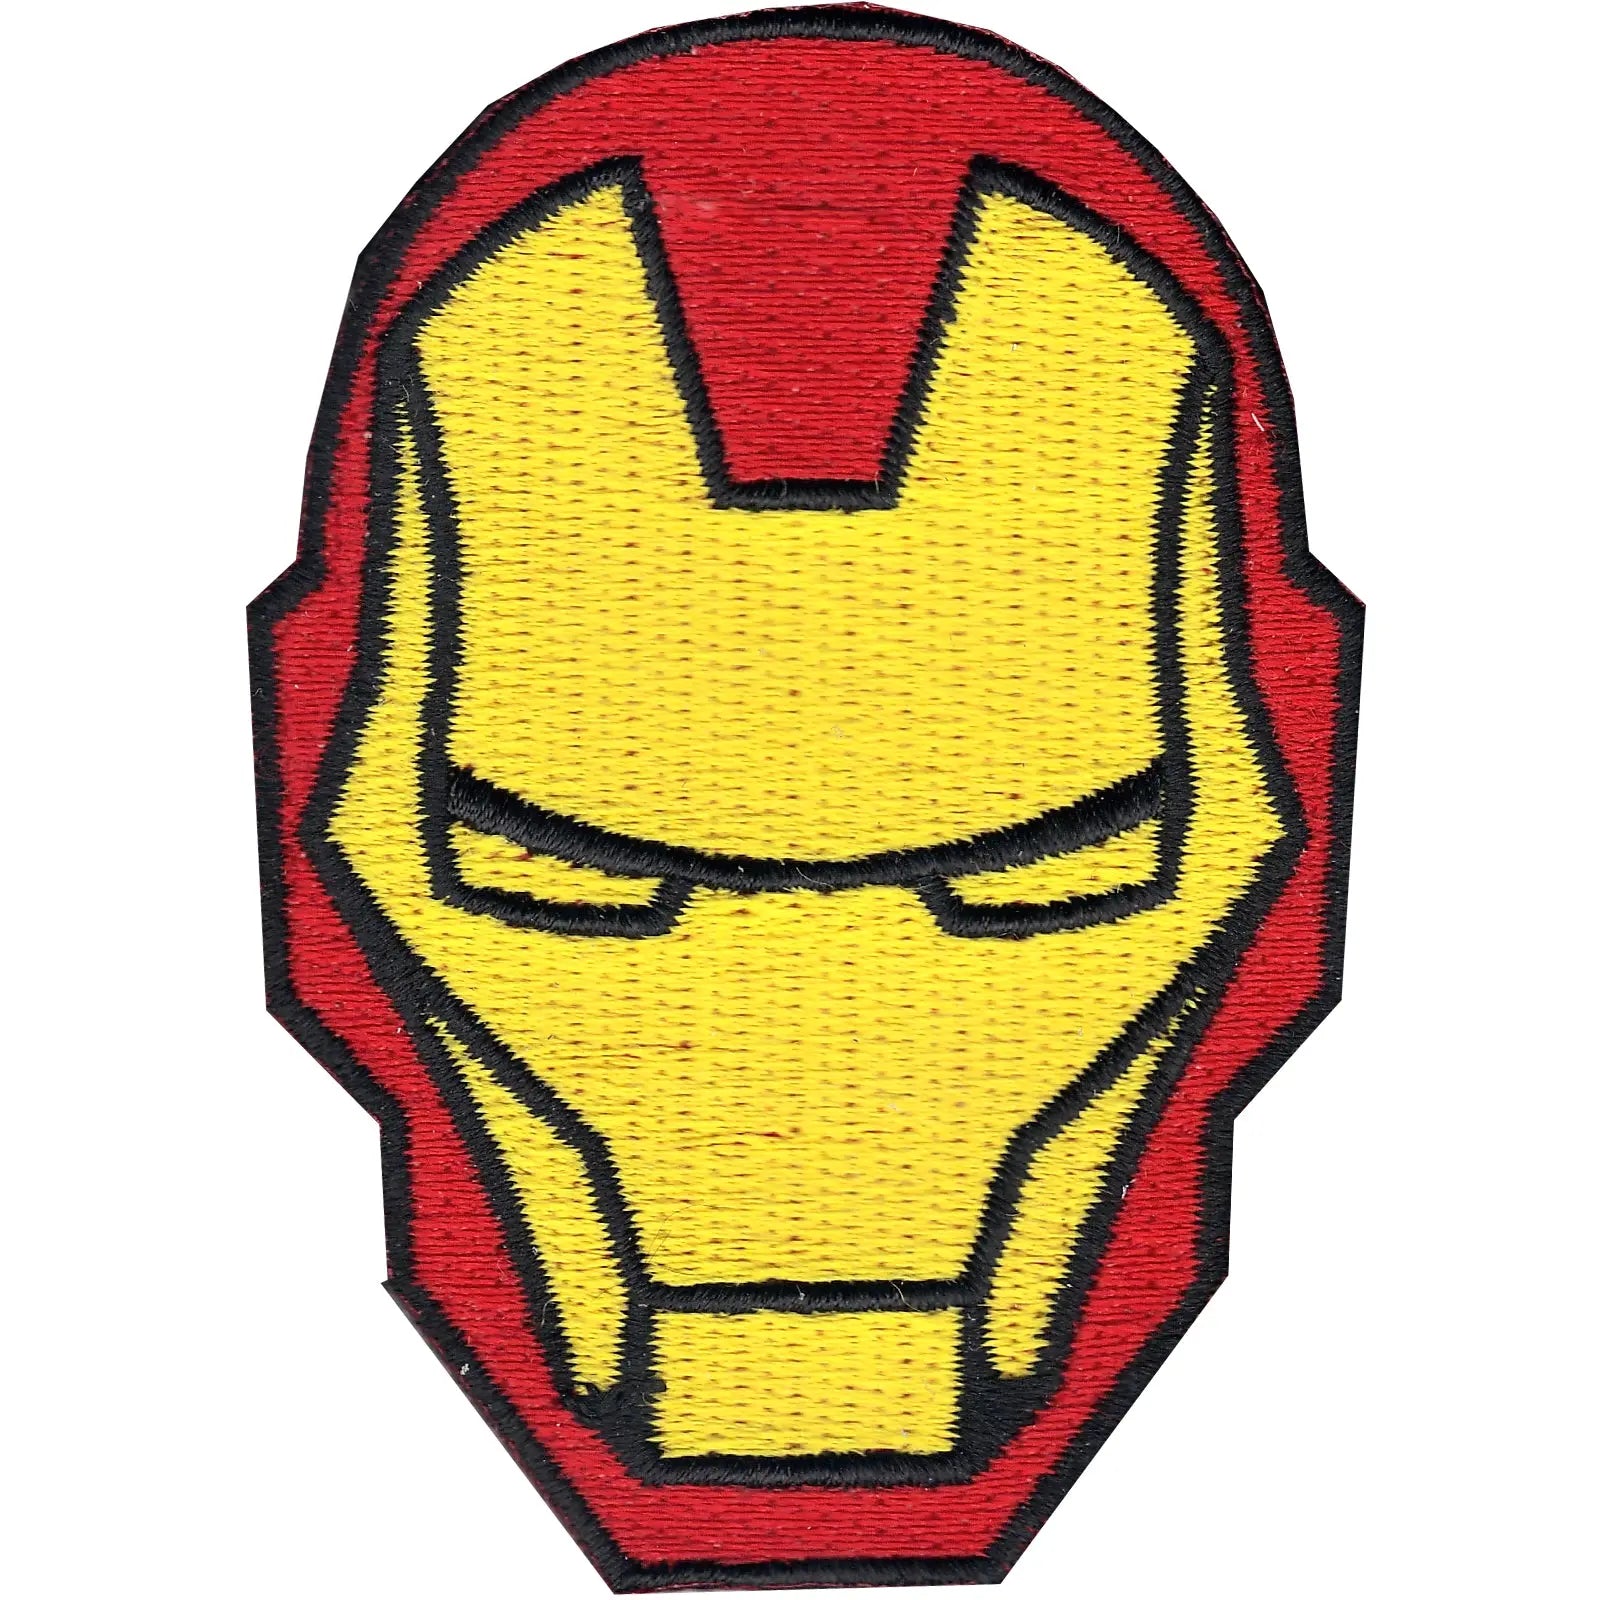 The Avengers Iron Man Casque Iron on Patch